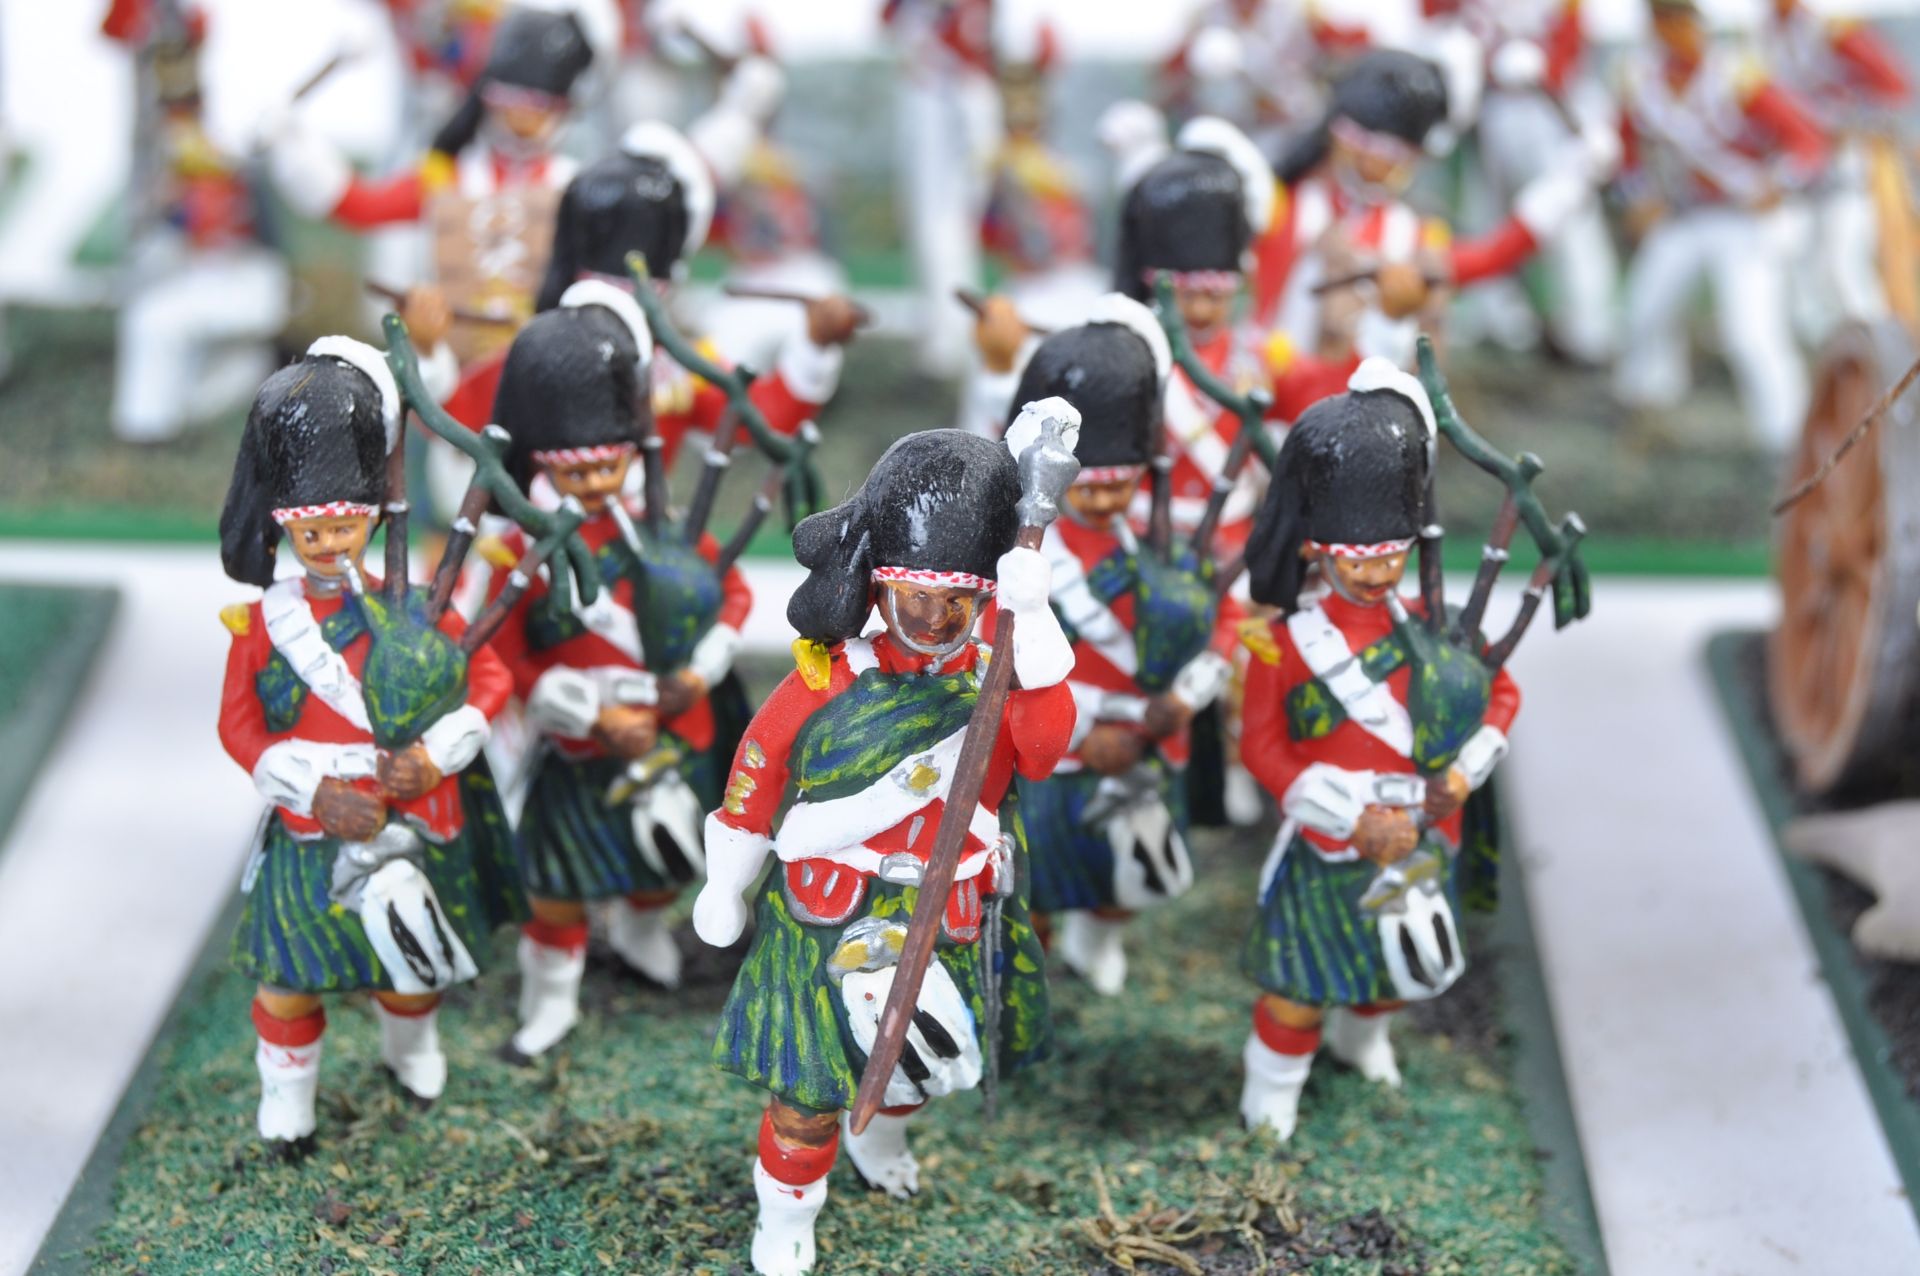 COLLECTION OF 1/32 SCALE PLASTIC NAPOLEONIC SOLDIER FIGURES - Image 4 of 6